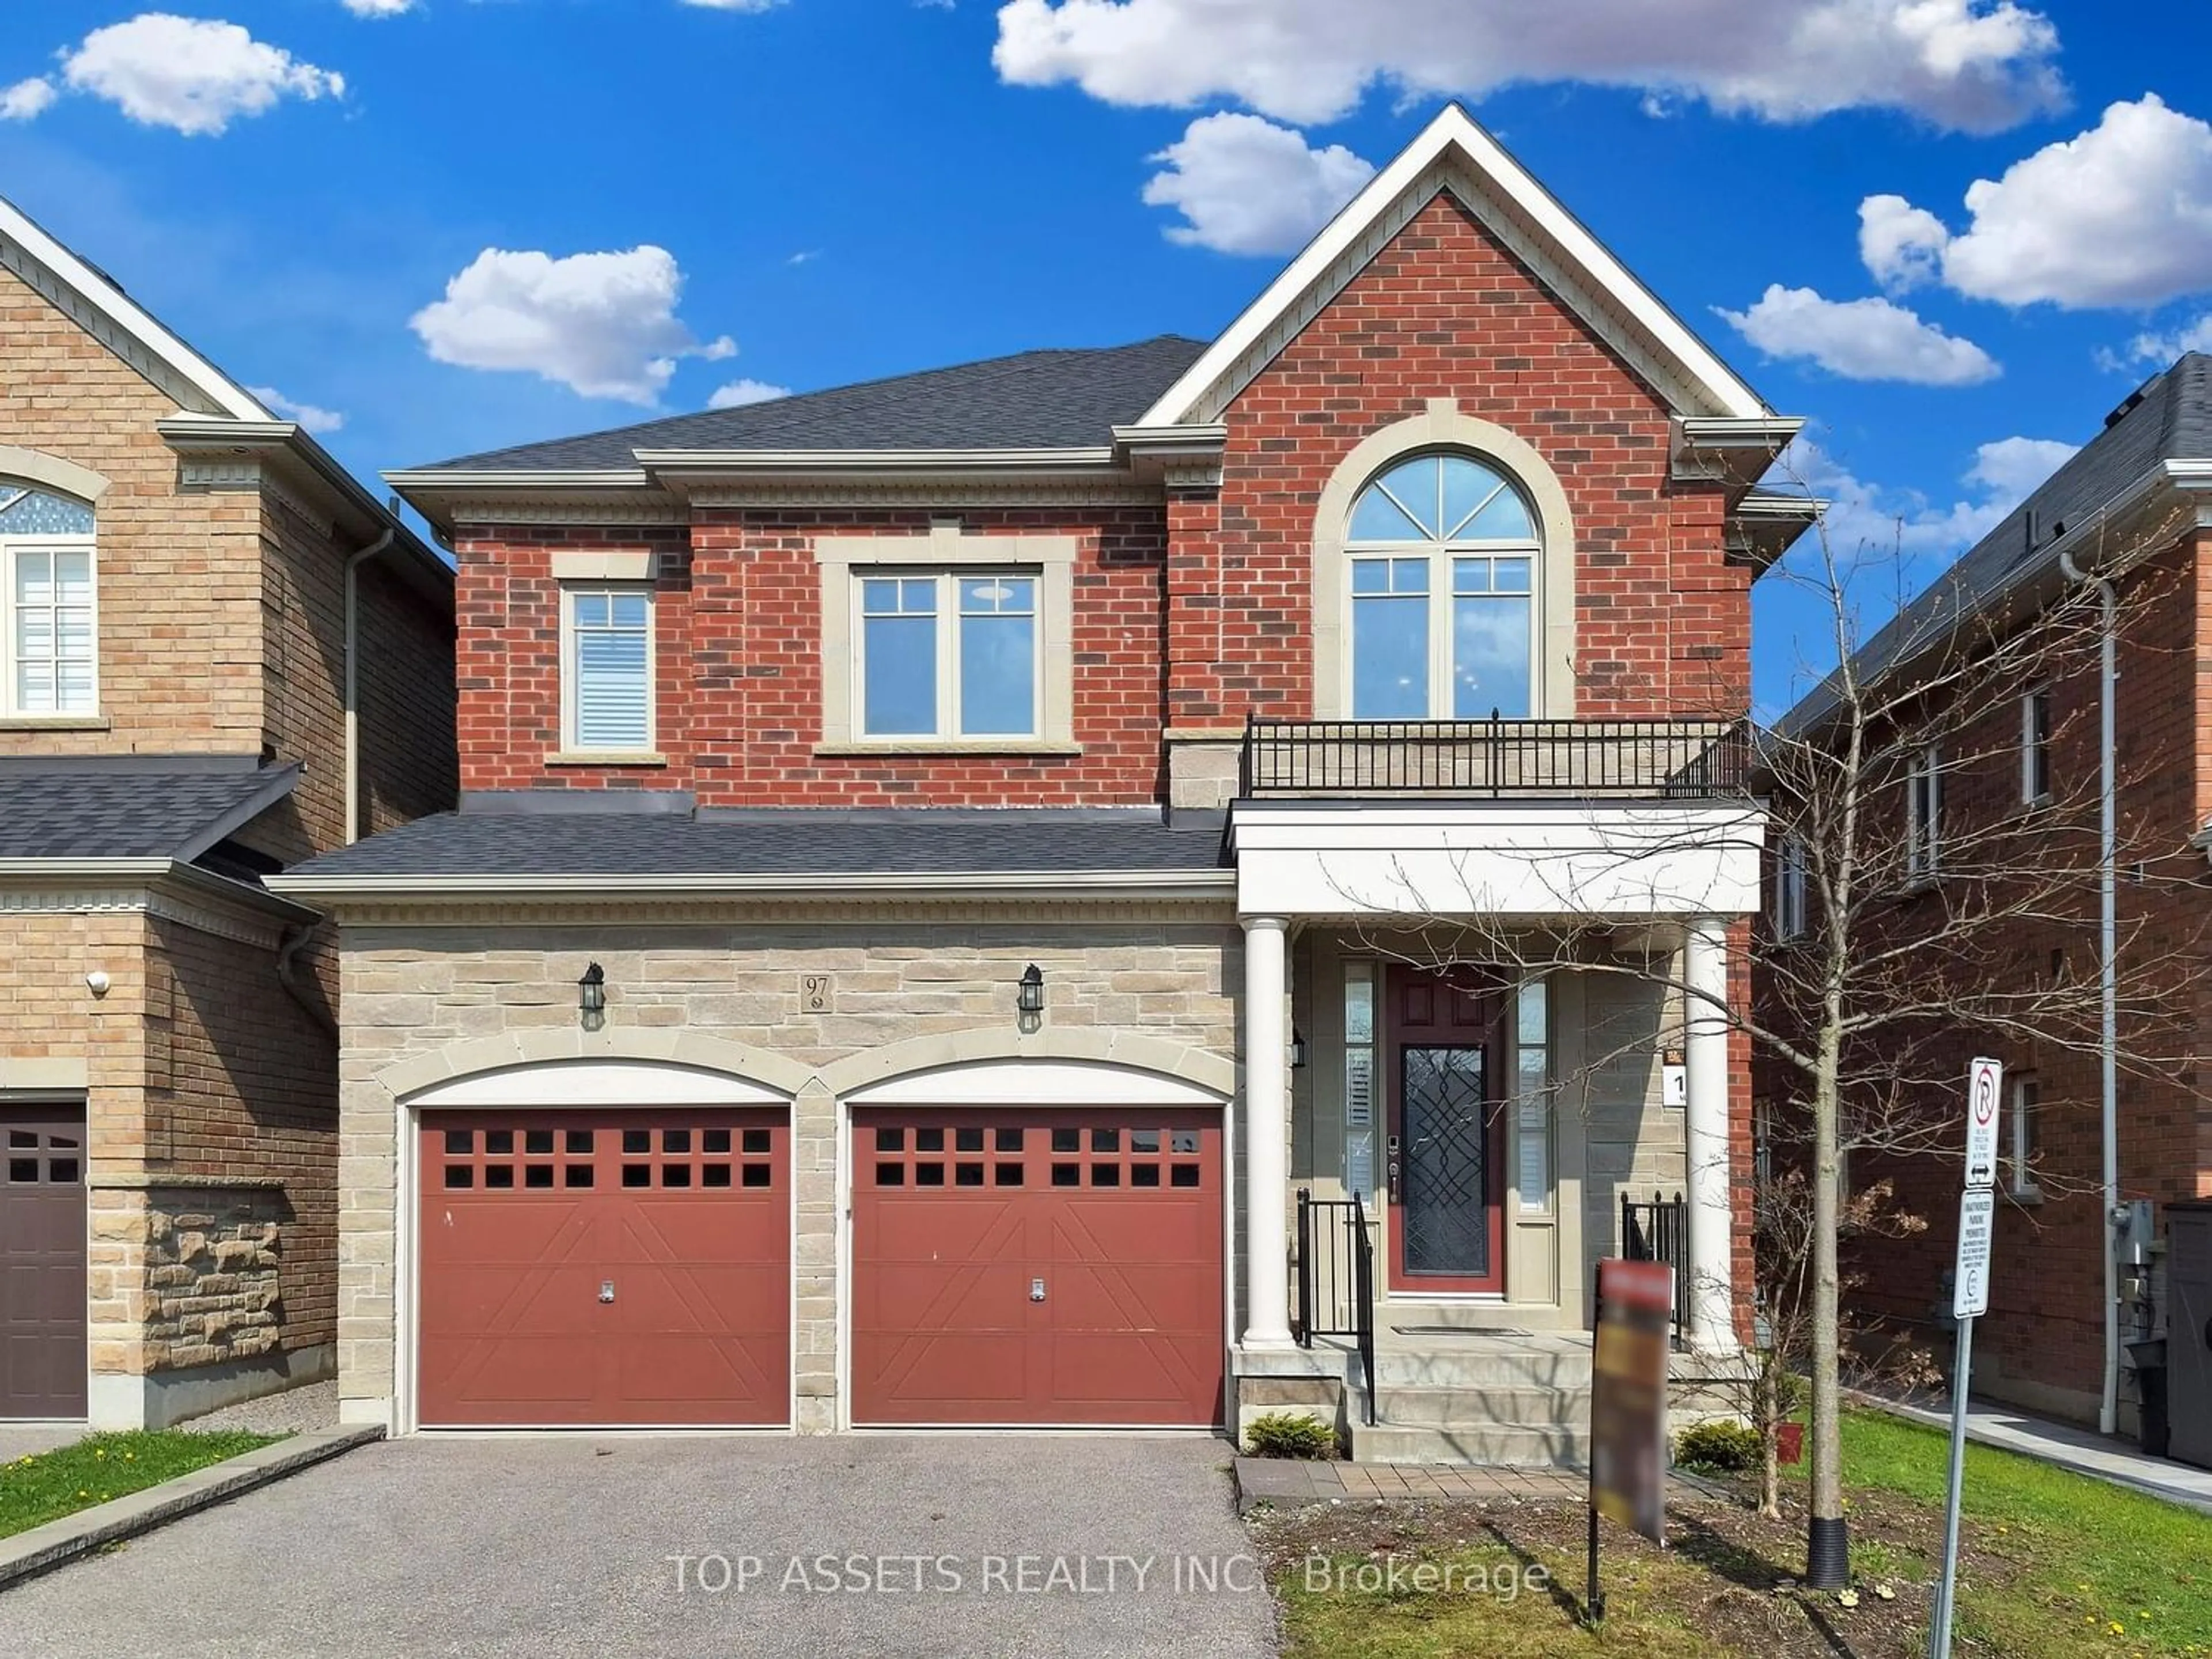 Home with brick exterior material for 97 Meadowsweet Lane, Richmond Hill Ontario L4E 1B9